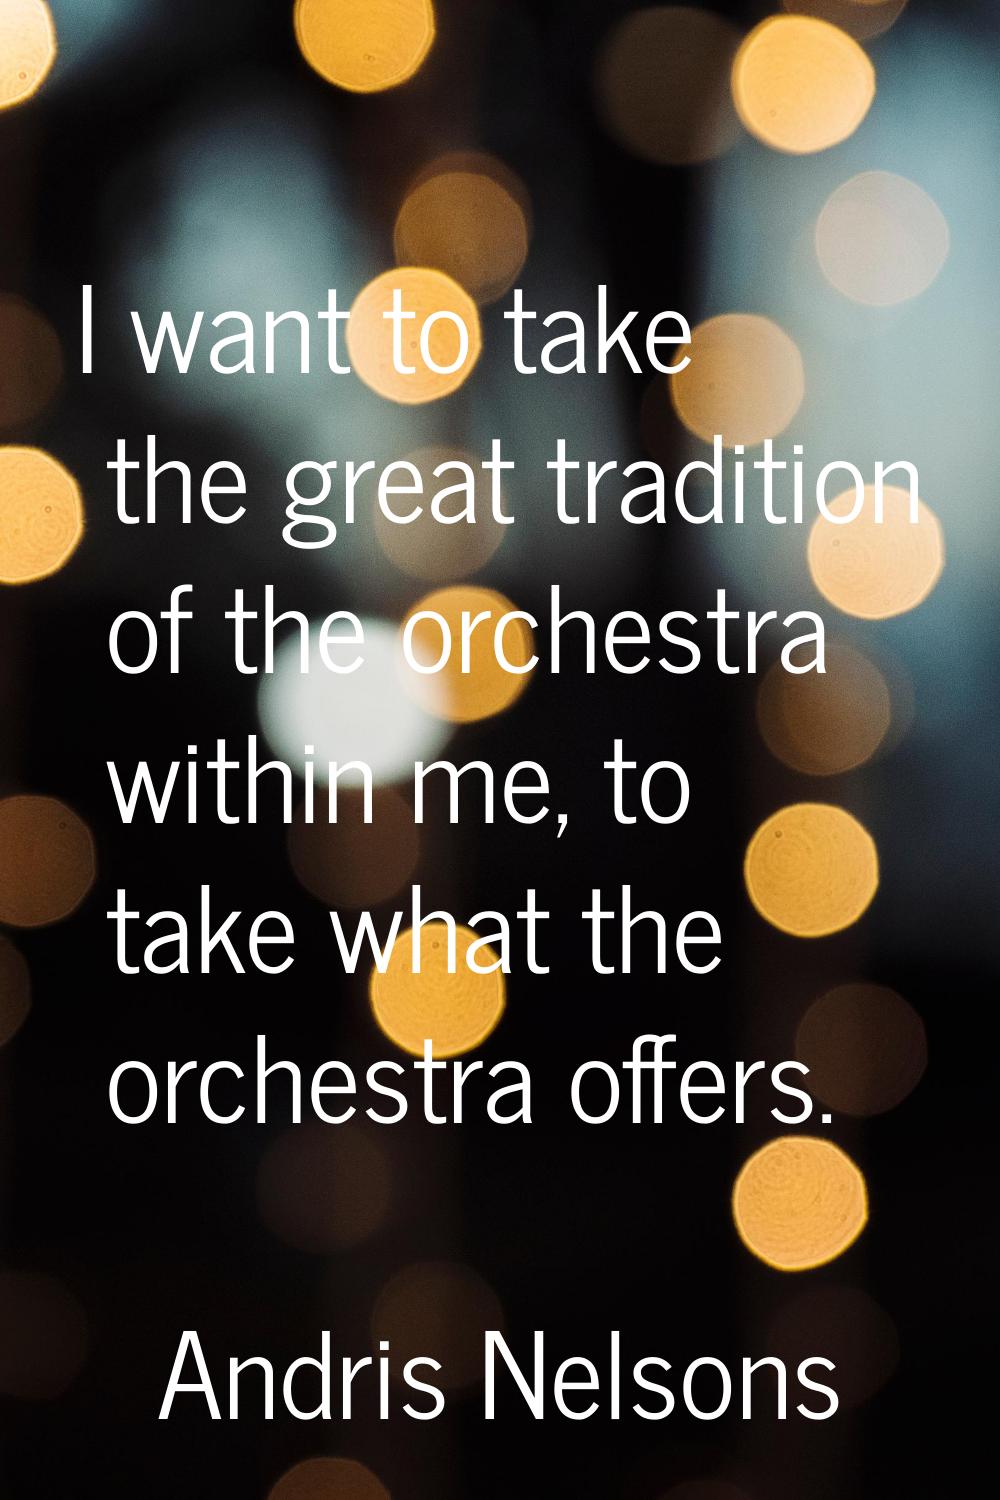 I want to take the great tradition of the orchestra within me, to take what the orchestra offers.